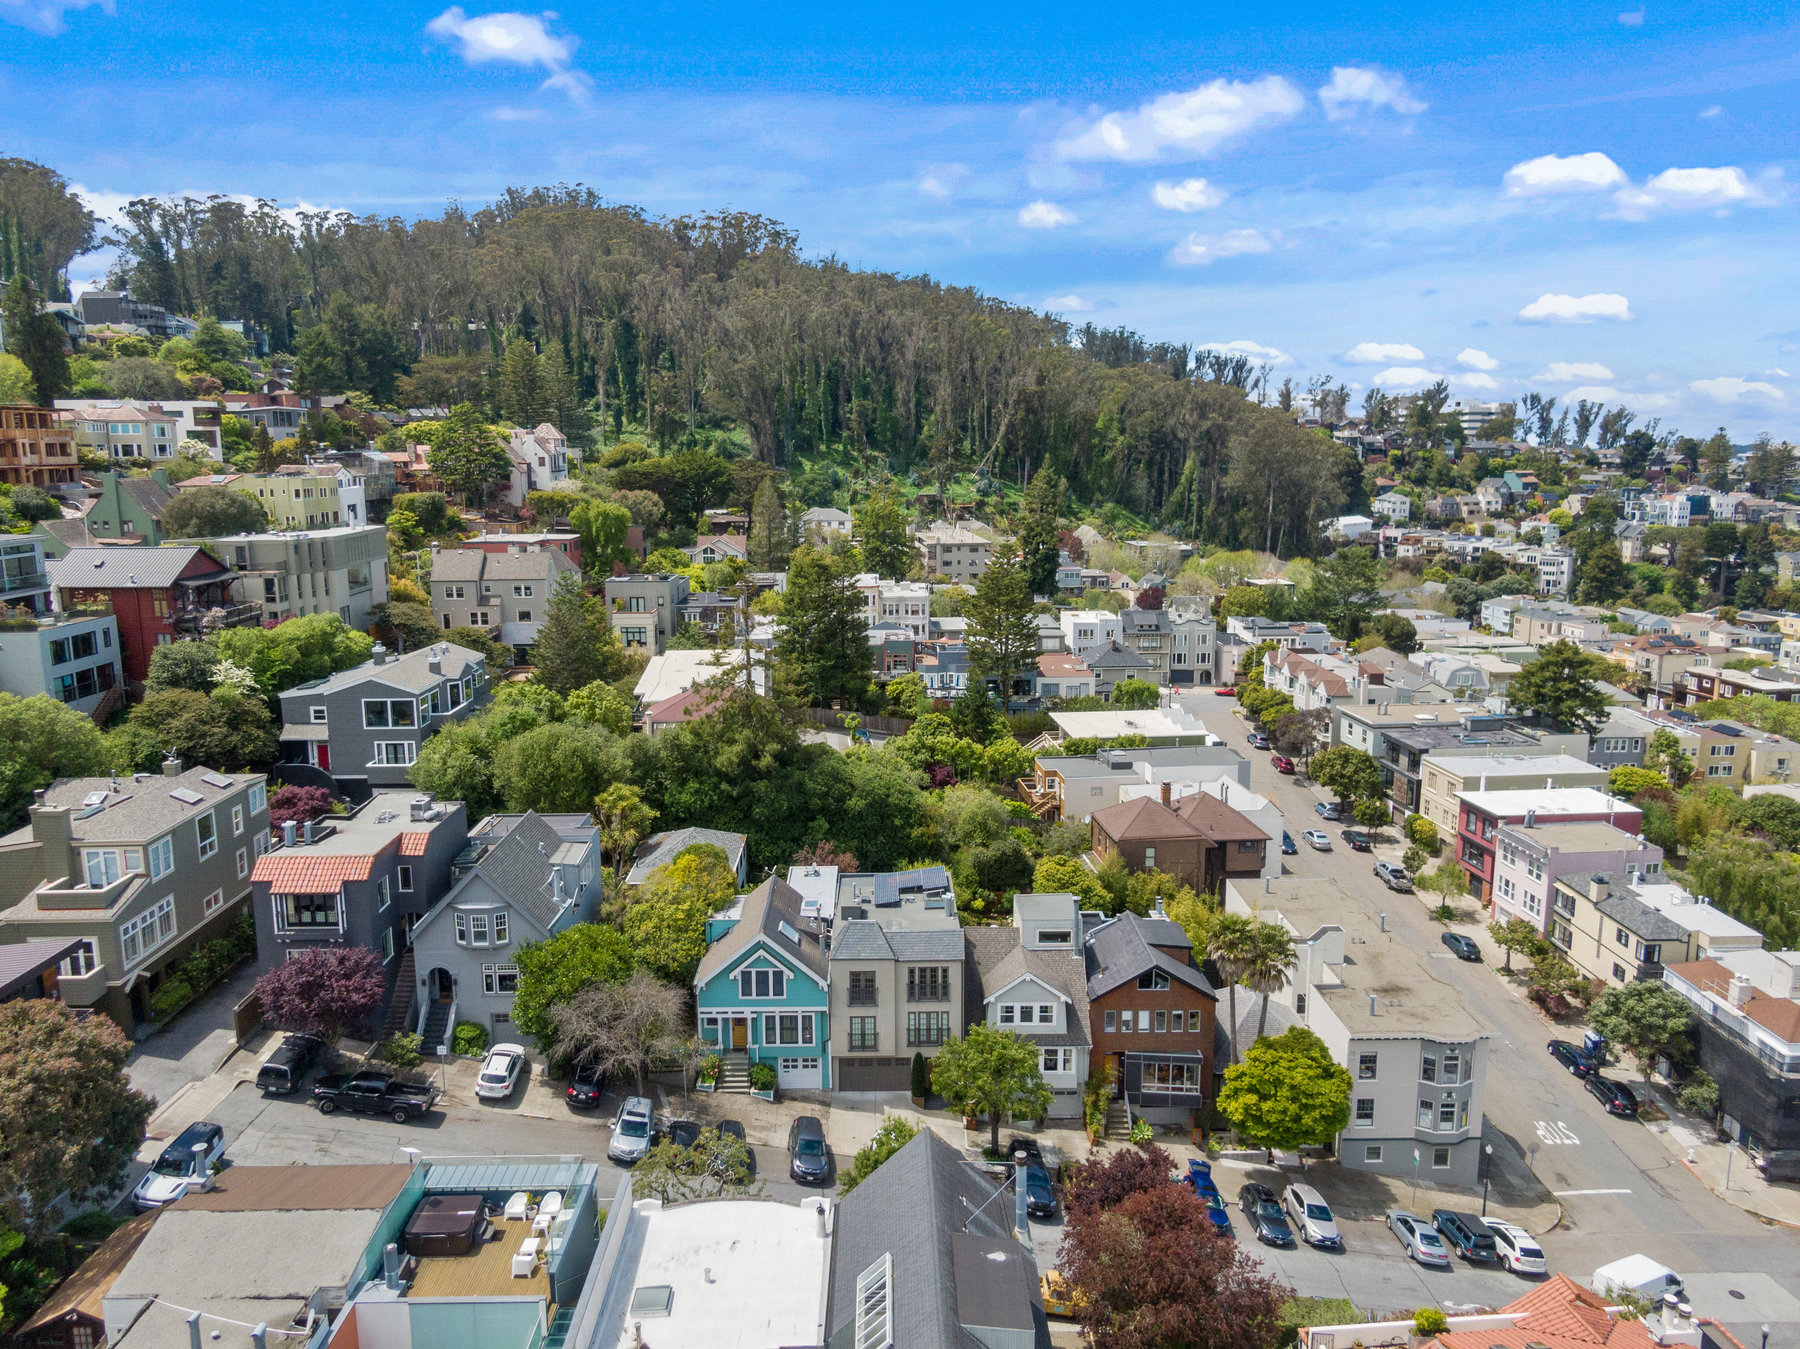 Property Photo: Aerial shot further away from 1523 Cole Street with Sutro Forest in the background. 